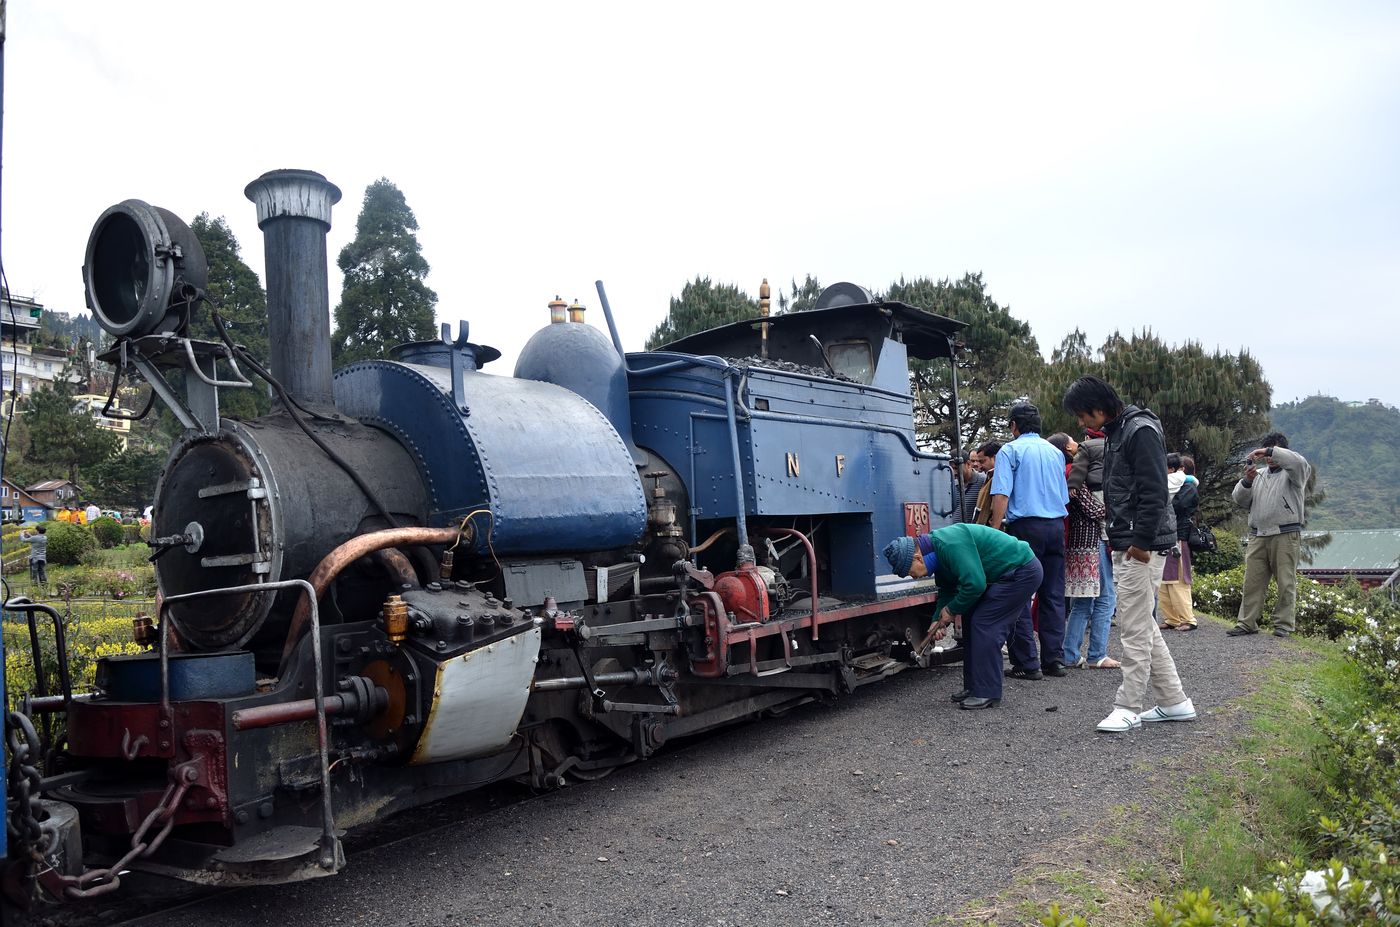 The Toy Train stops at Batasia War Memorial station in Darjeeling and people walk and go around the engine while looking over the lovely valley below 